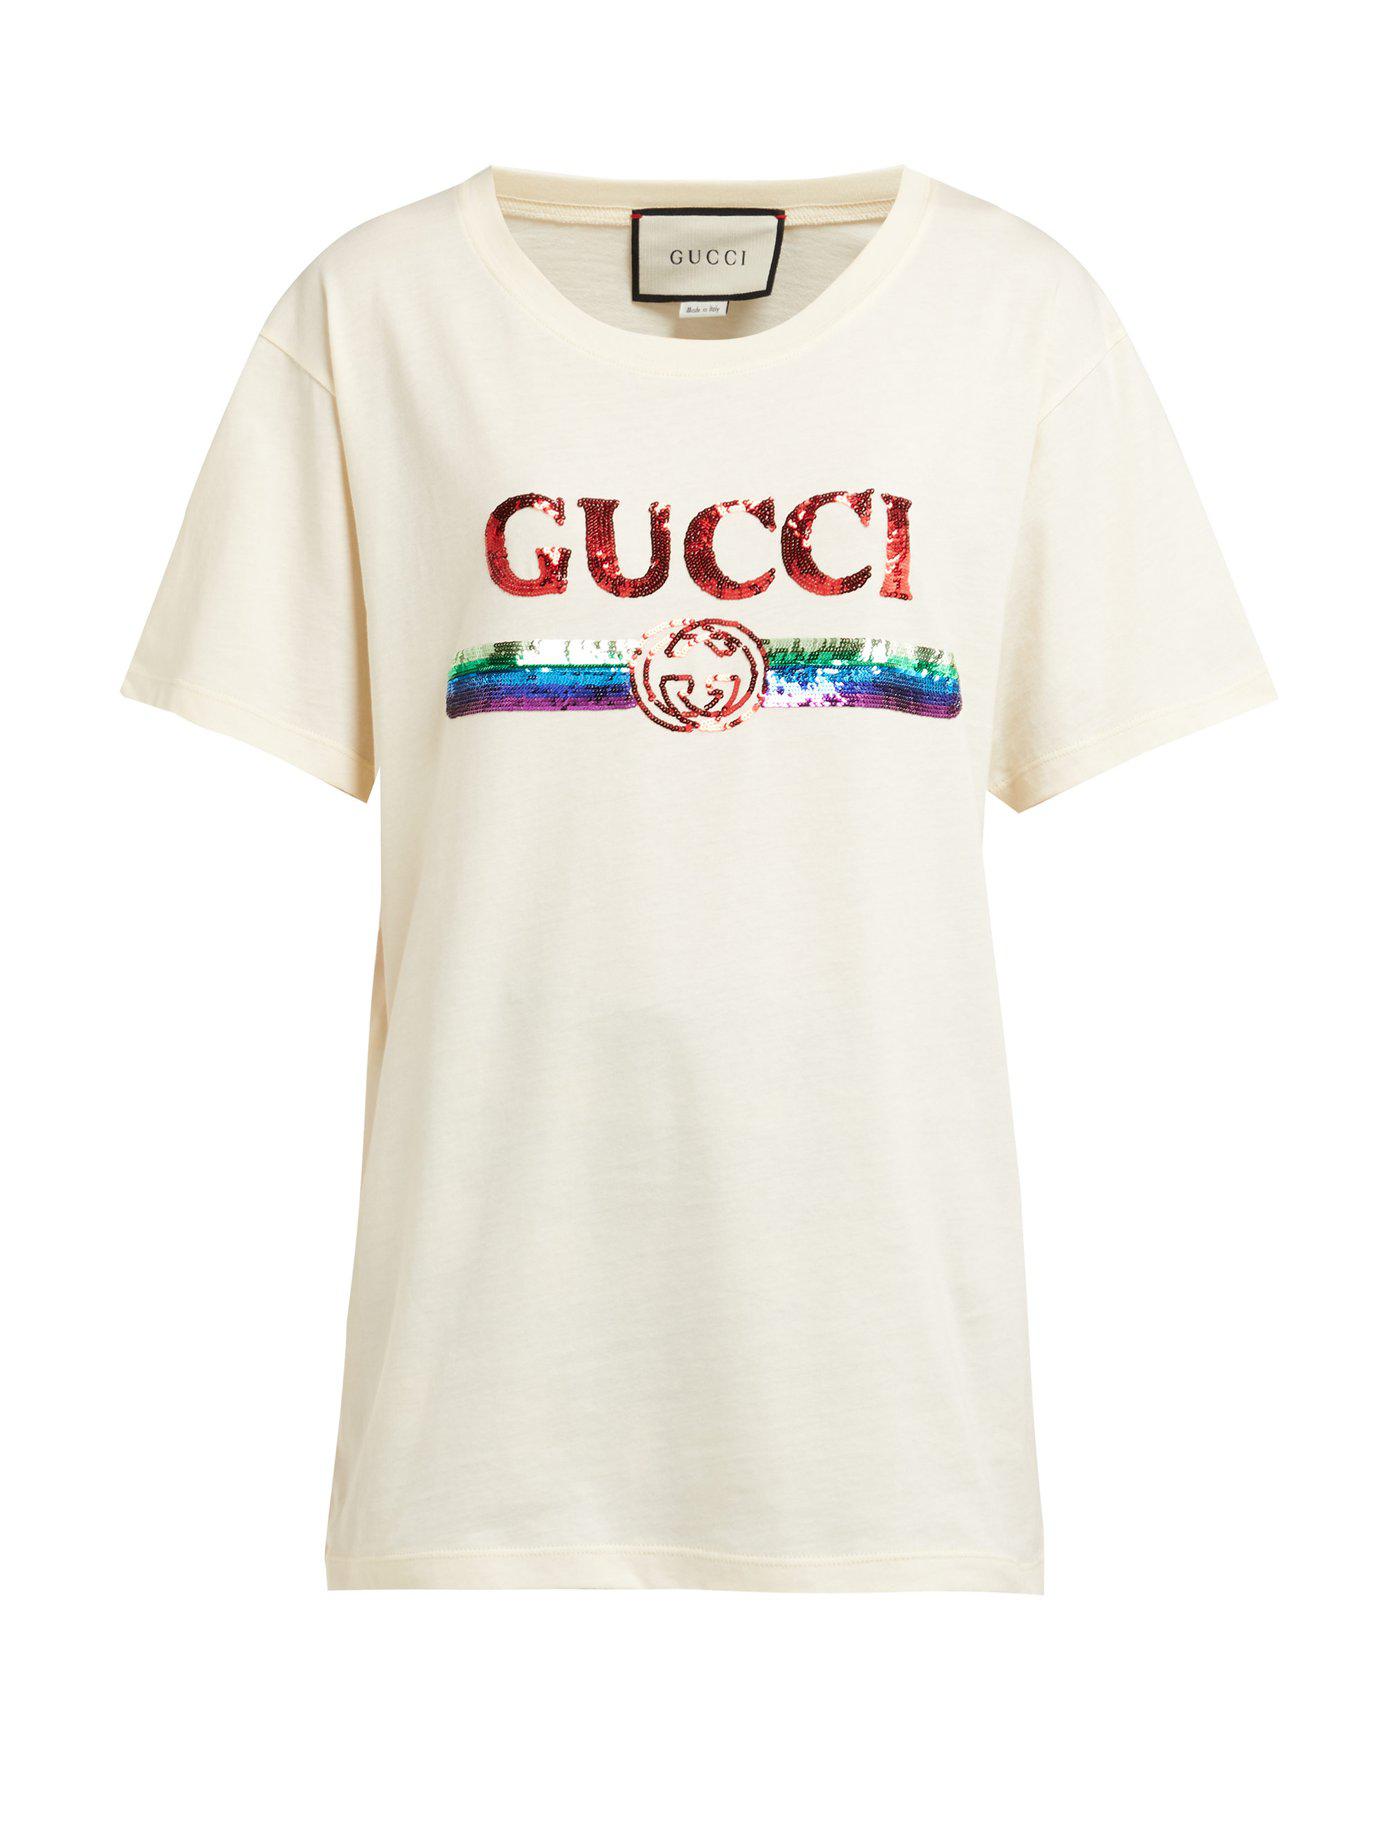 Gucci Sequin Embellished Logo Cotton T Shirt in White - Lyst